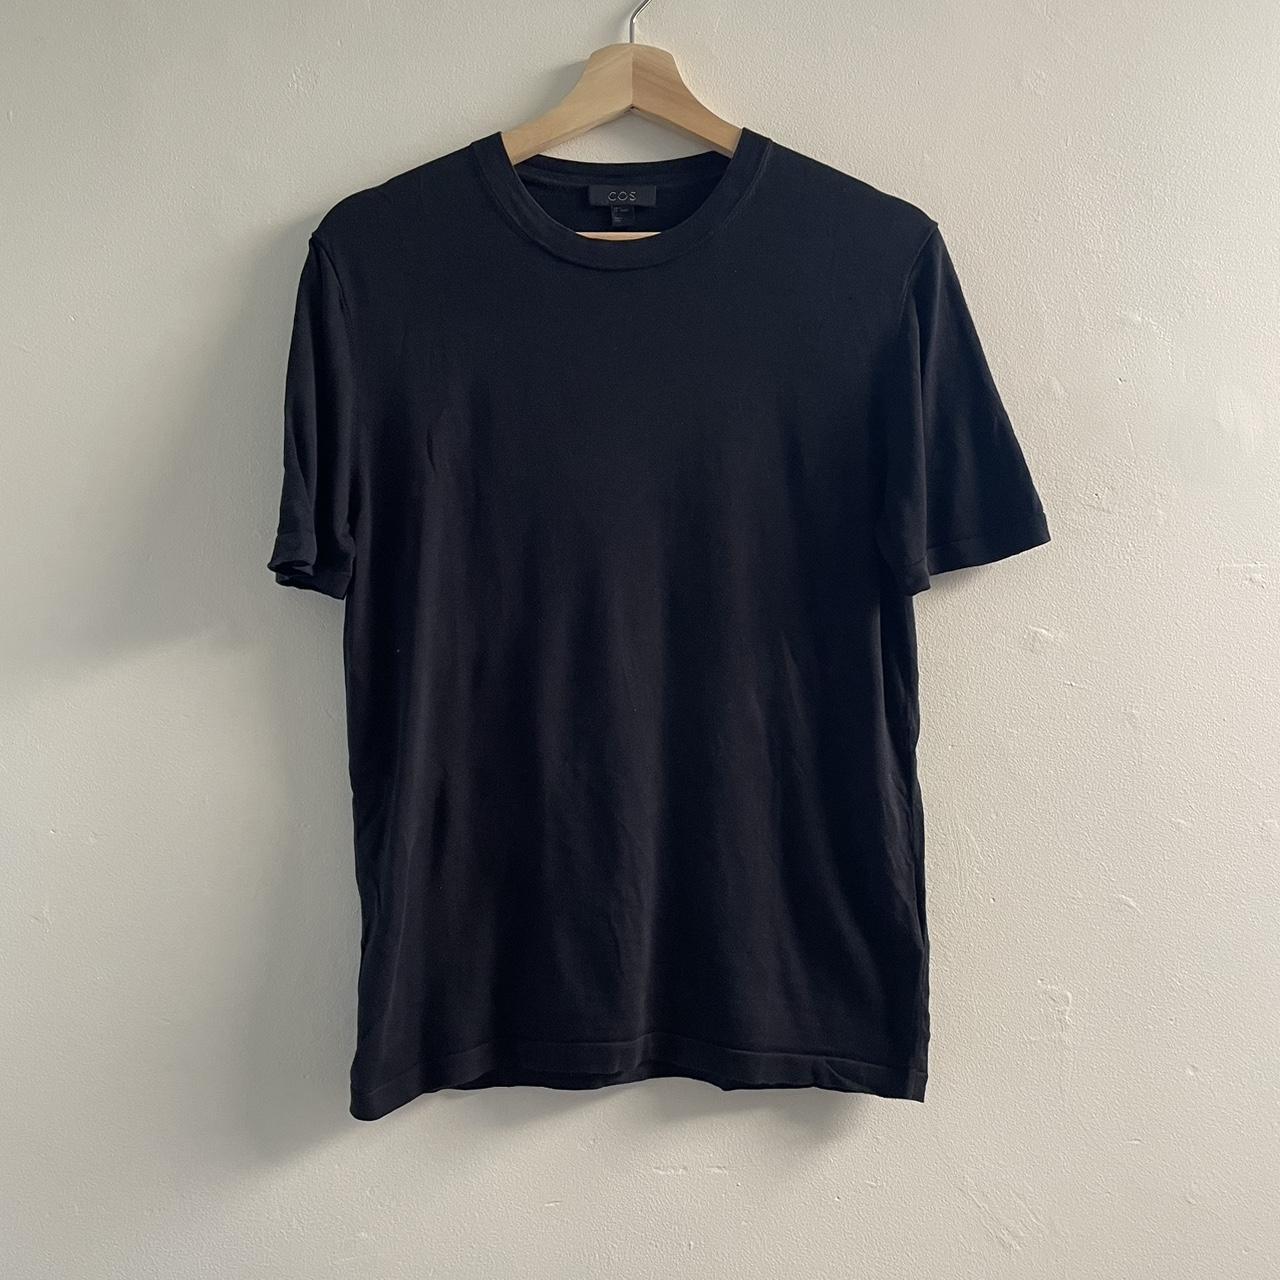 COS men’s fitted knit tee - Depop